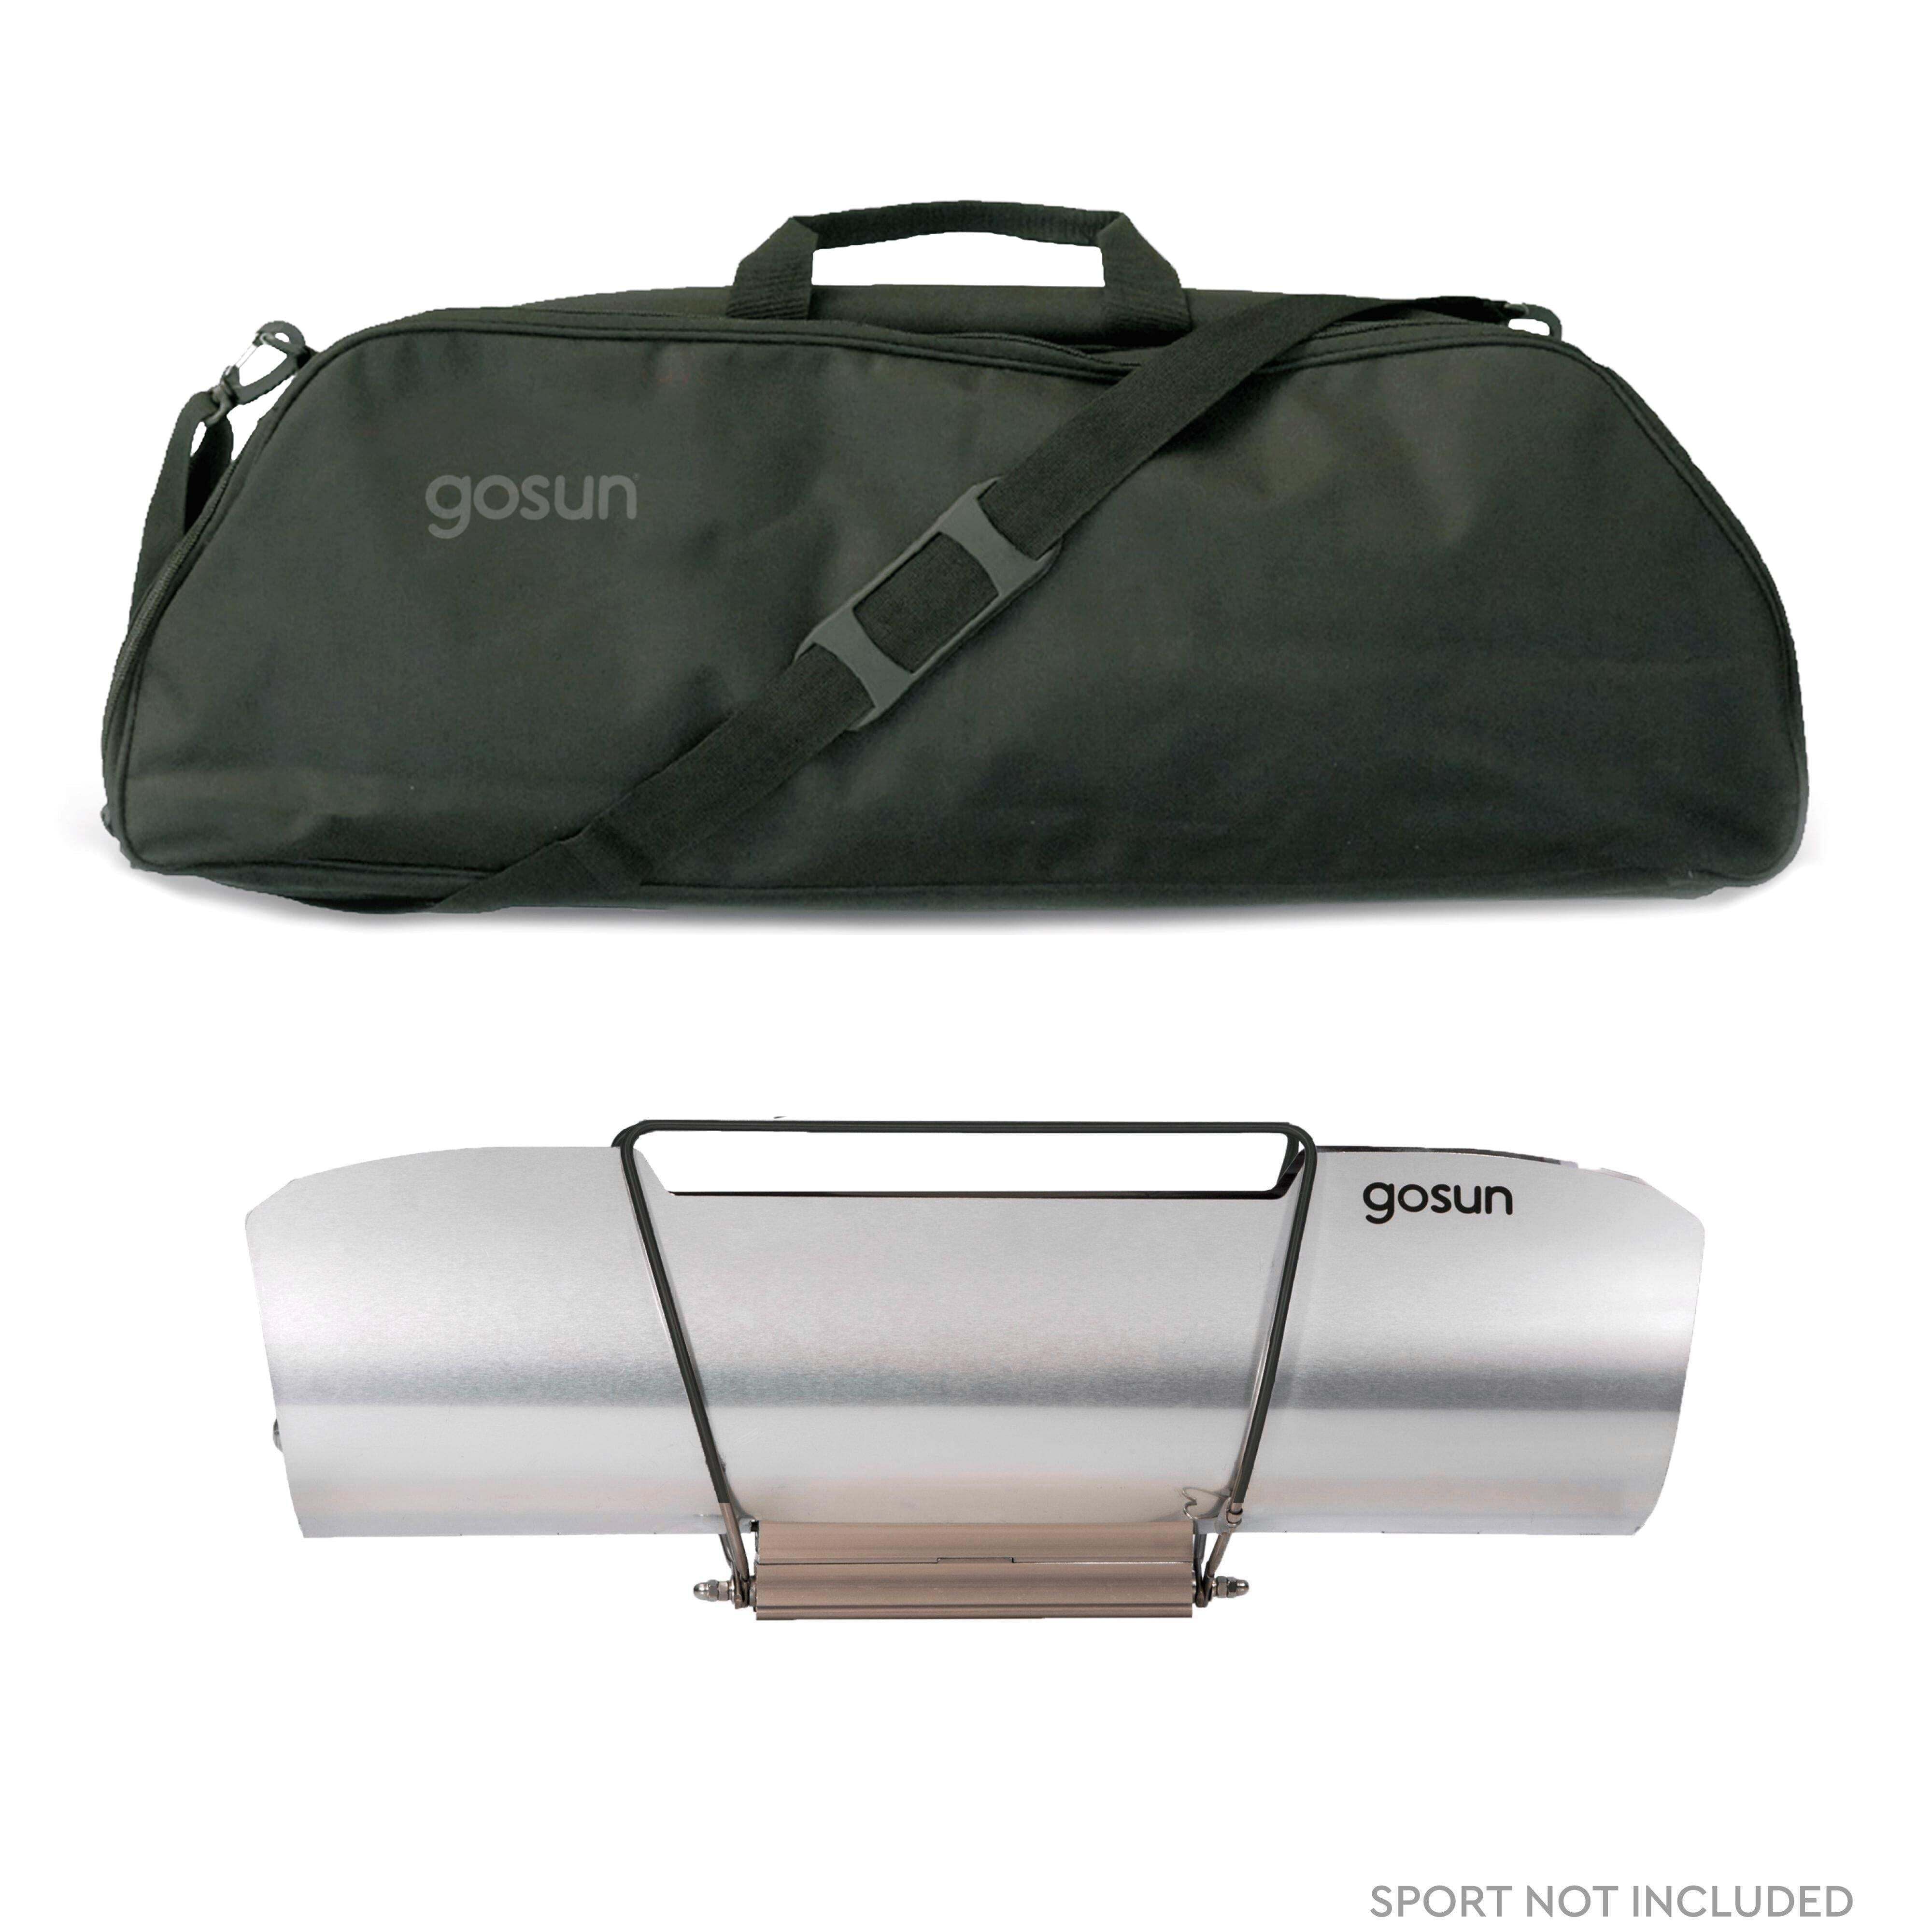 Solar Oven Carrying Case